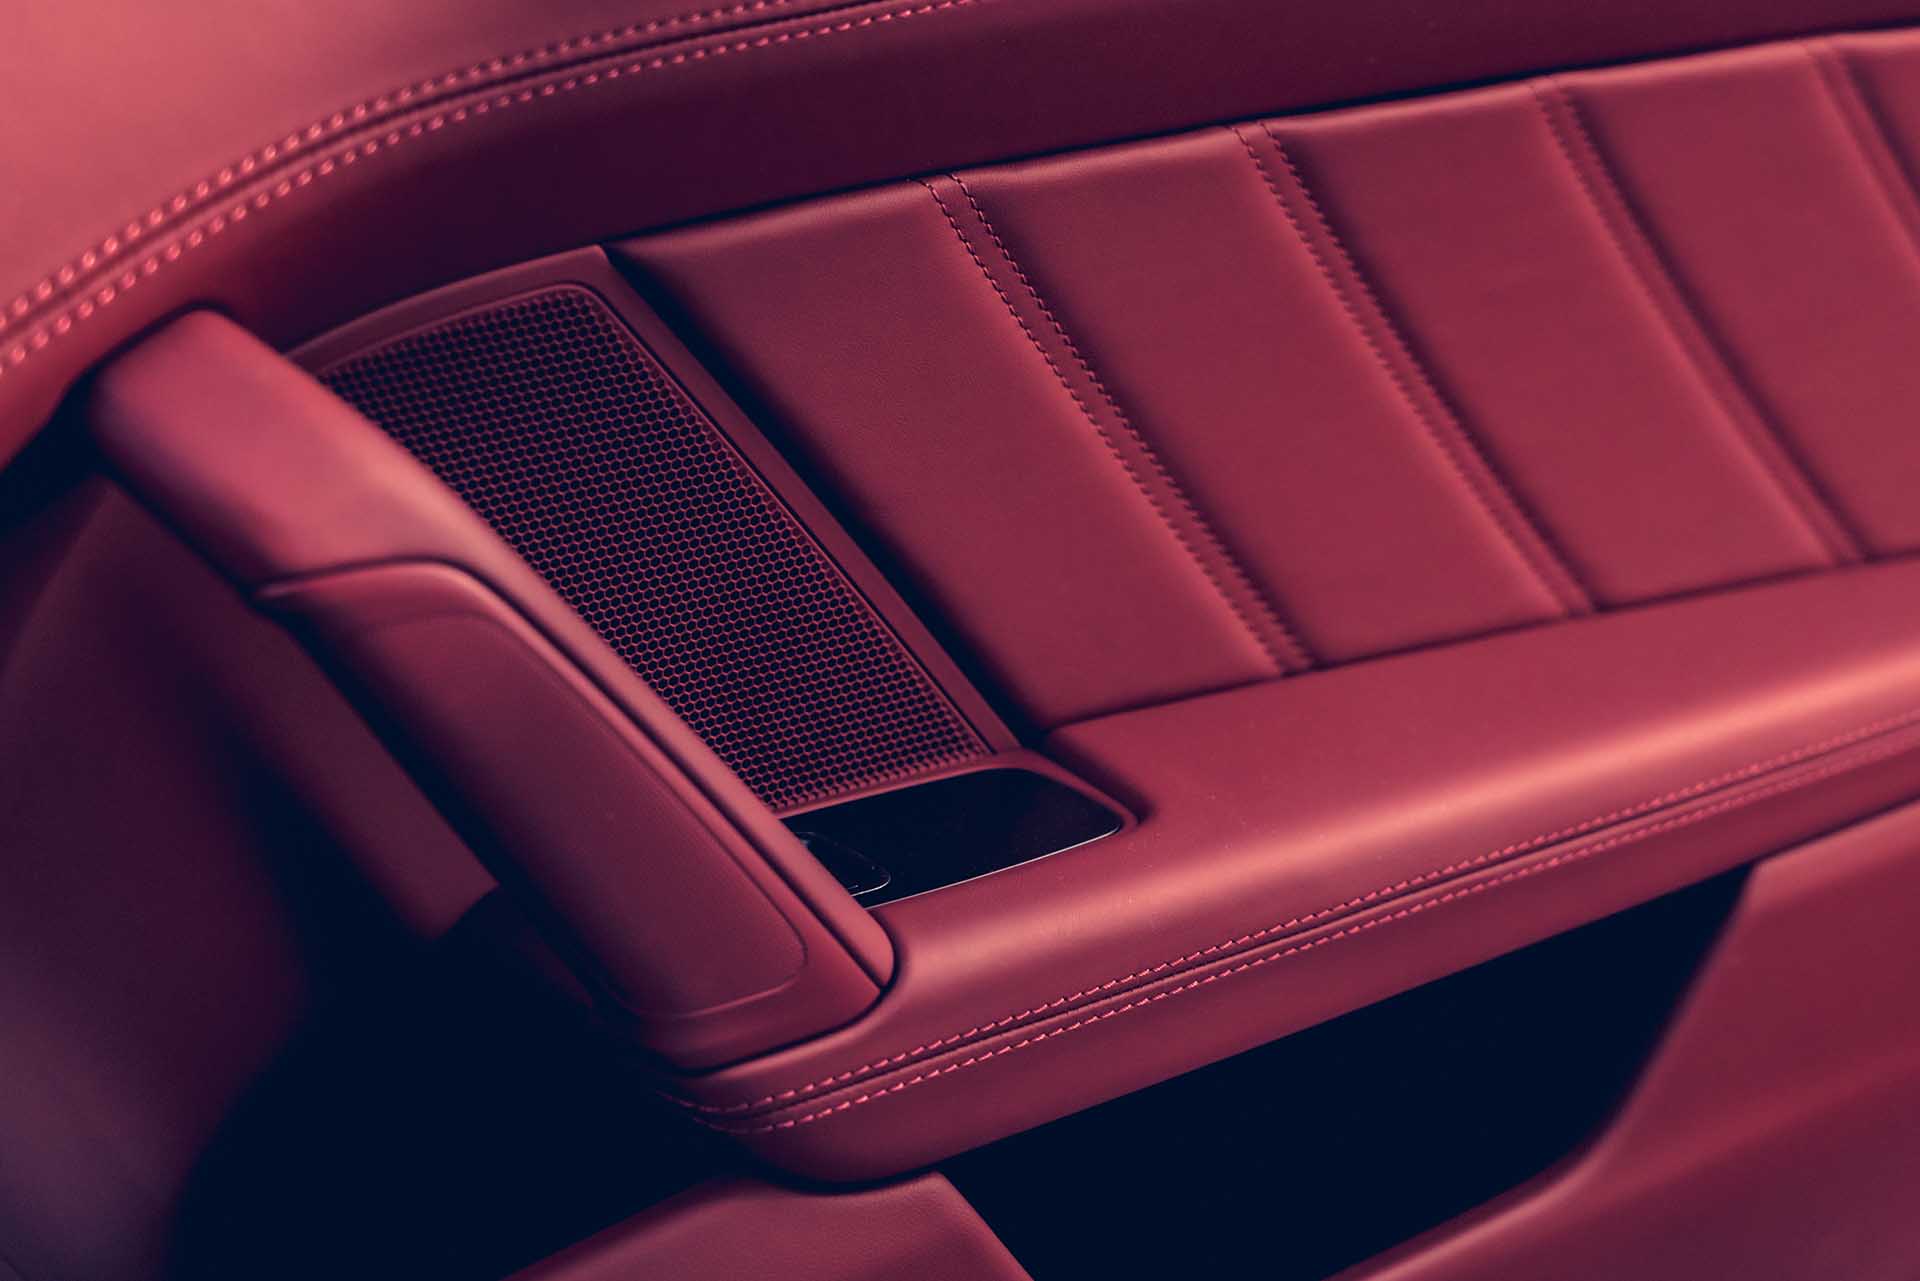 It's in leather: 2021 911 adds historic interior which is a gimme